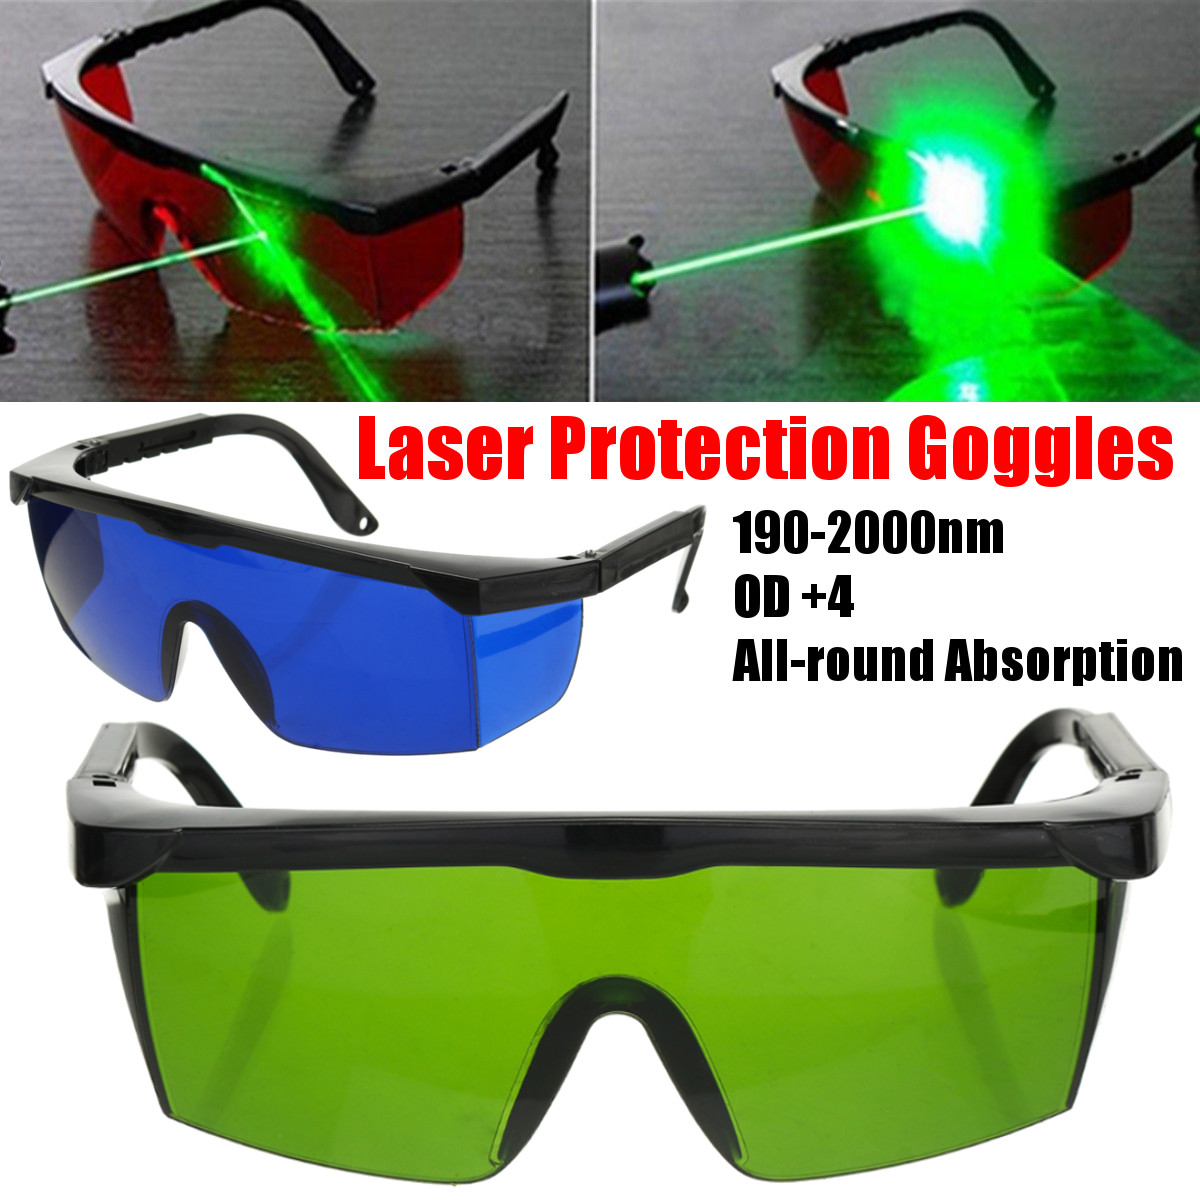 Pro-Laser-Protection-Goggles-Protective-Safety-Glasses-IPL-OD4D-190nm-2000nm-Laser-Goggles-1424199-3